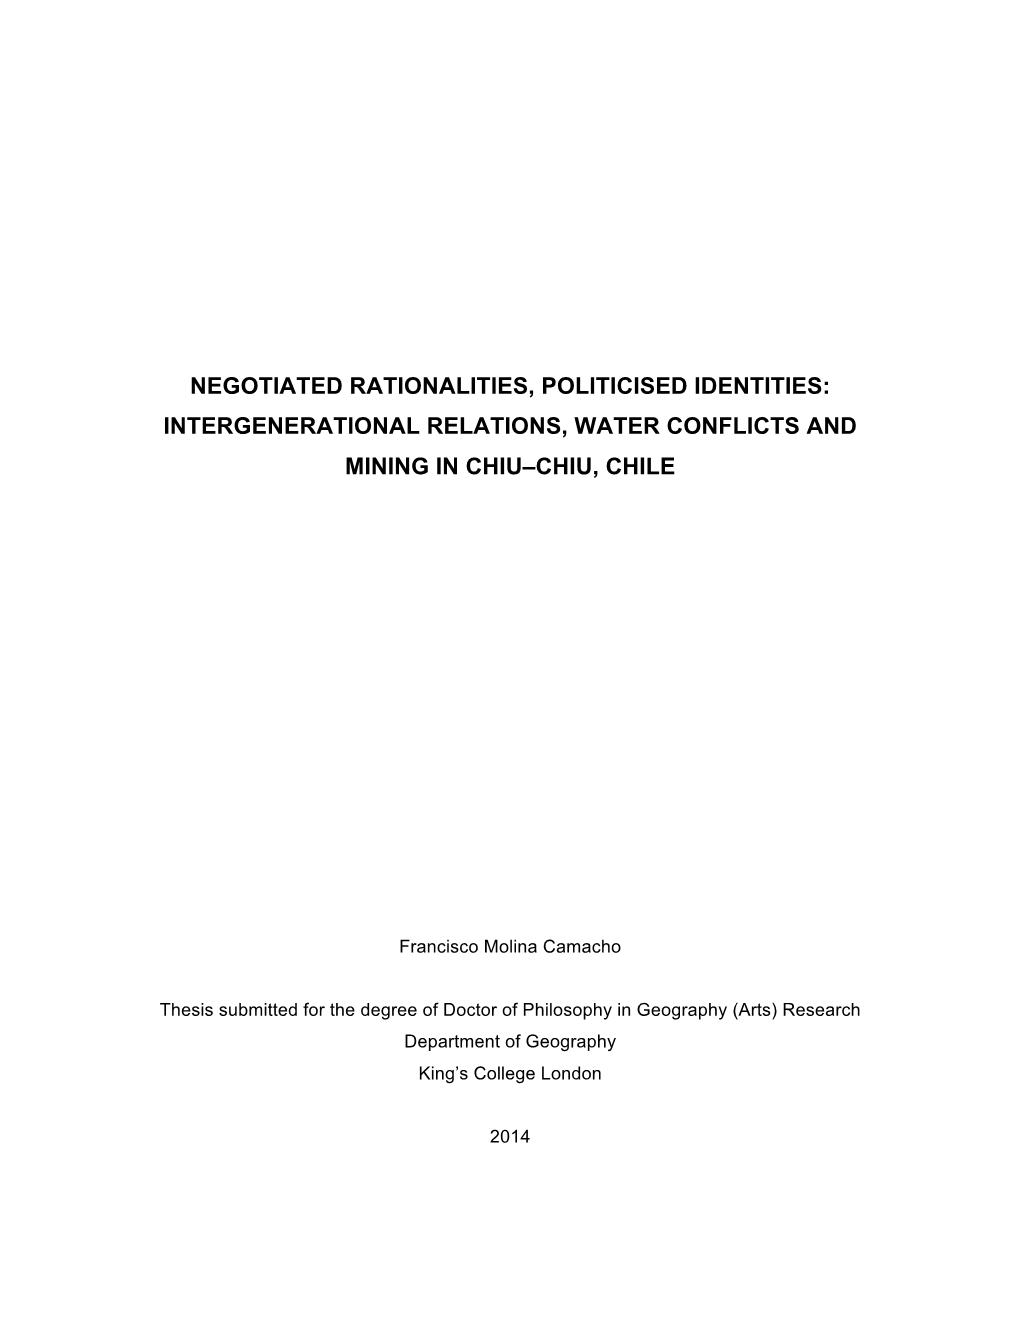 Intergenerational Relations, Water Conflicts and Mining in Chiu–Chiu, Chile